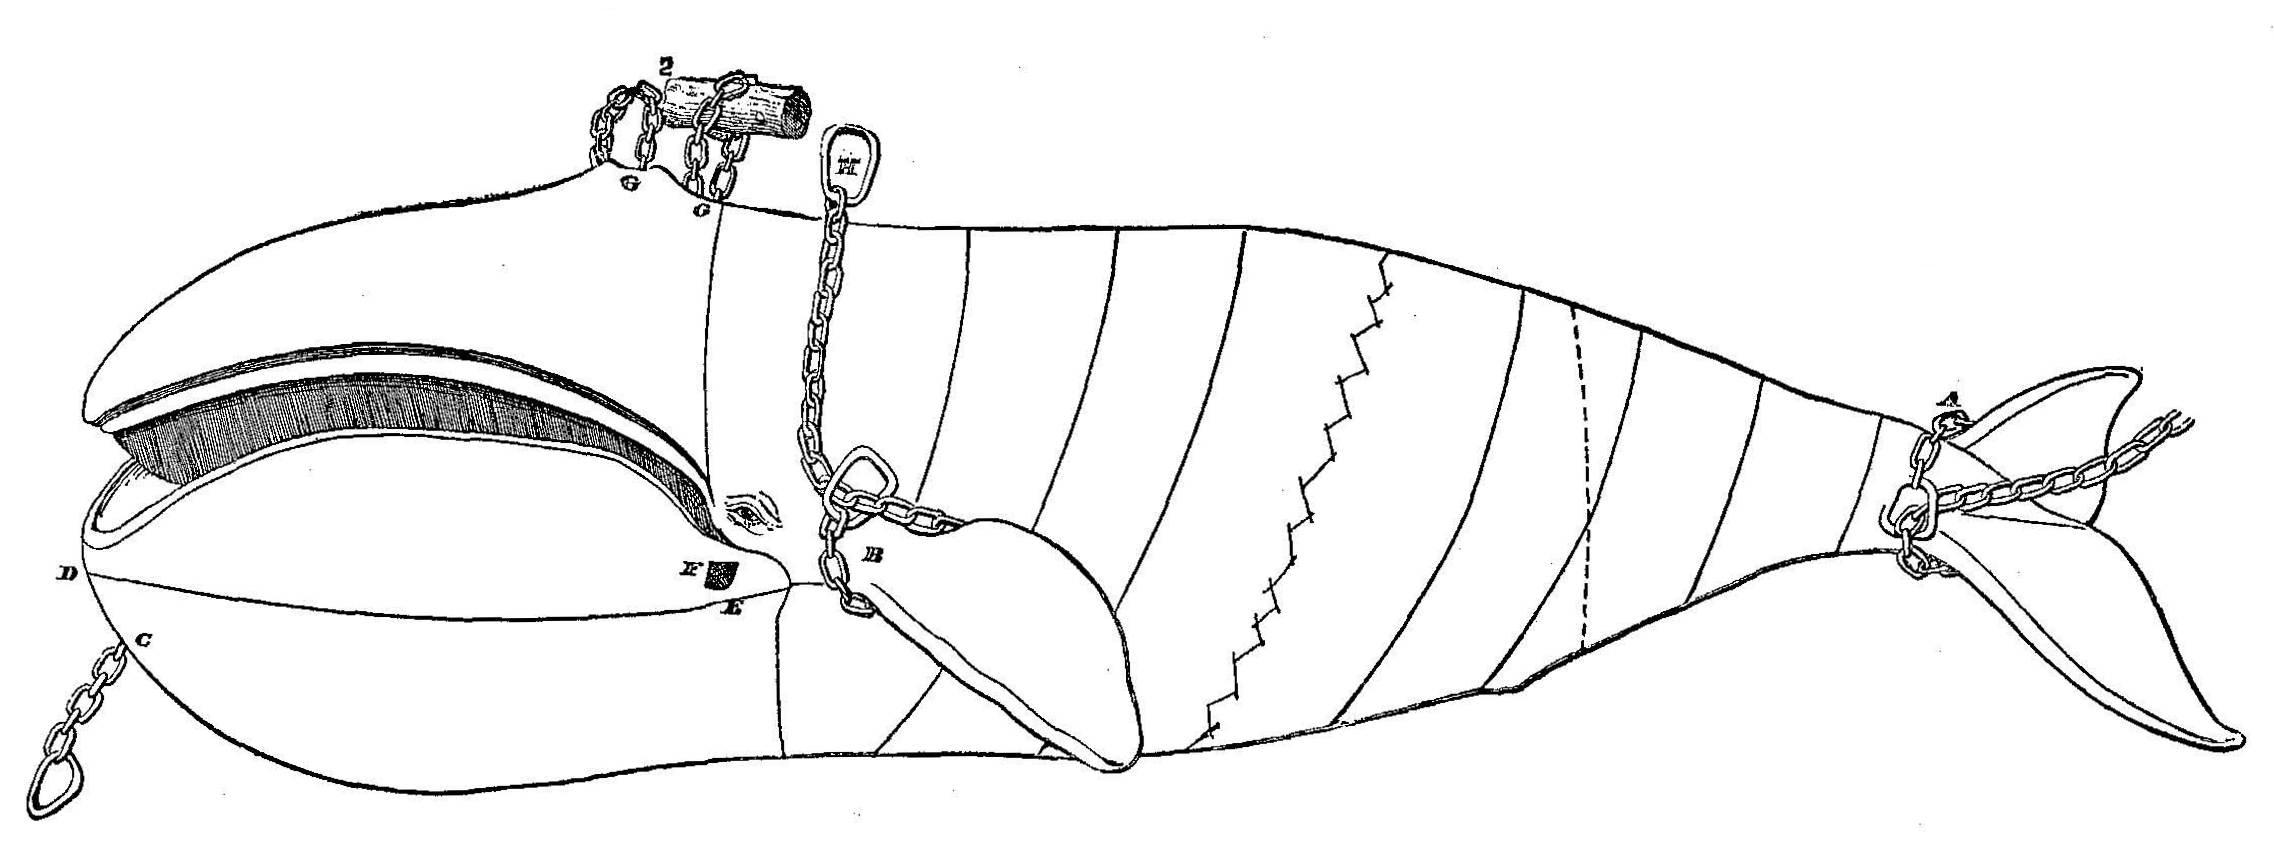 Scammon - Diagram Showing the Manner of Cuting-In The Bowhead and Right Whale